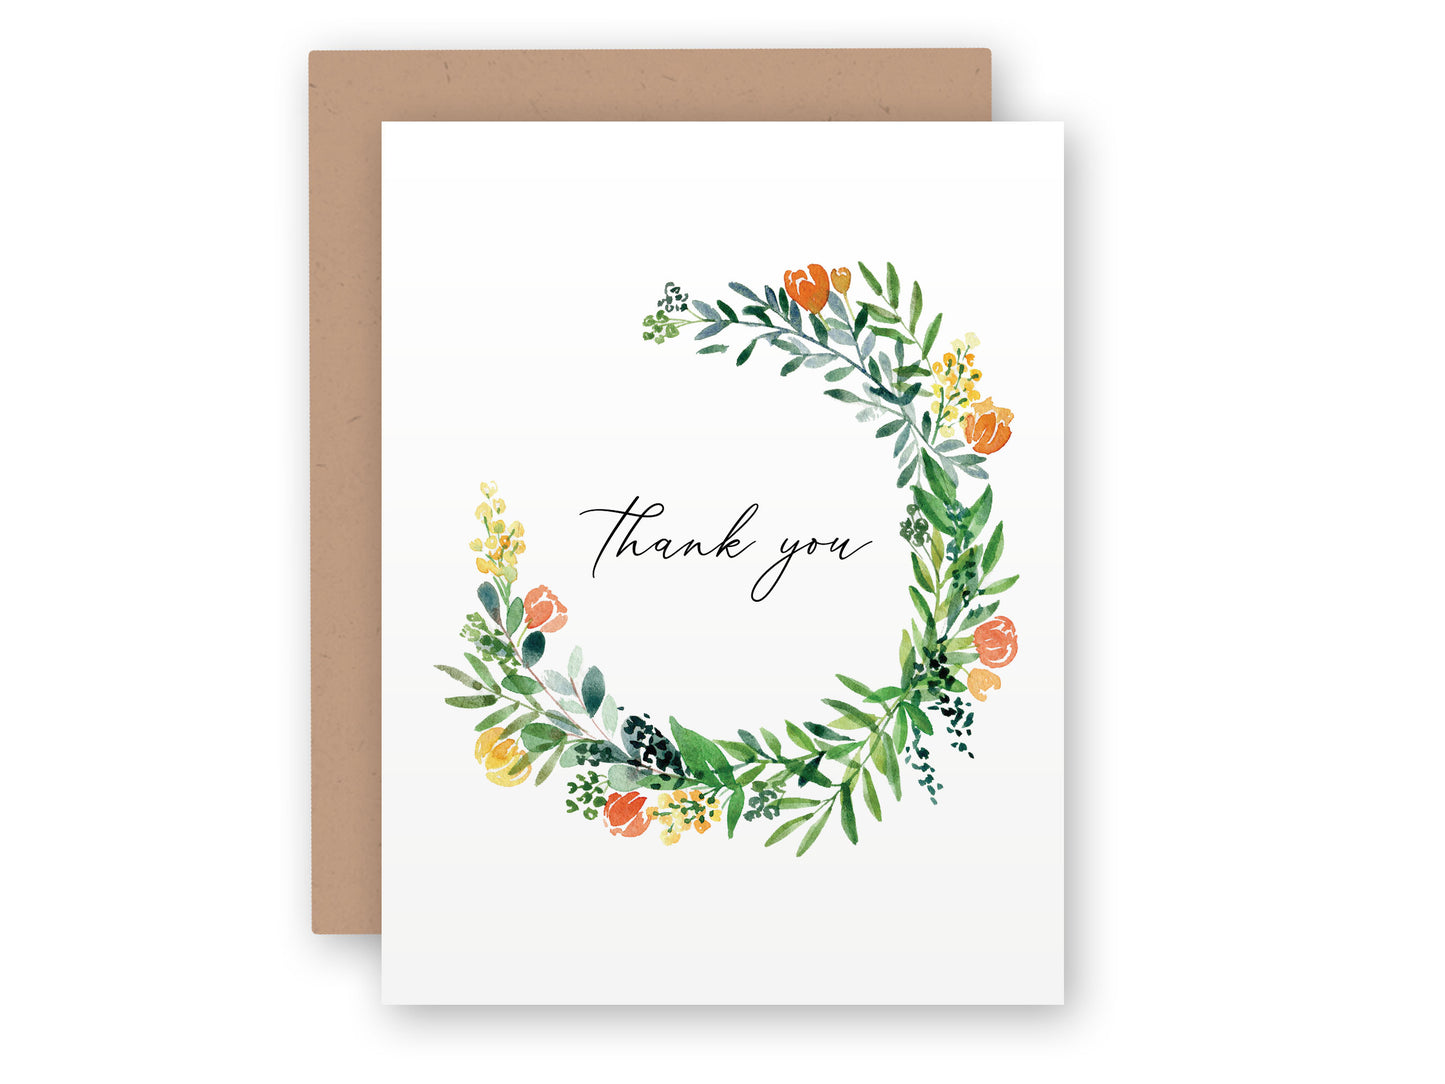 a thank card with an orange and green wreath